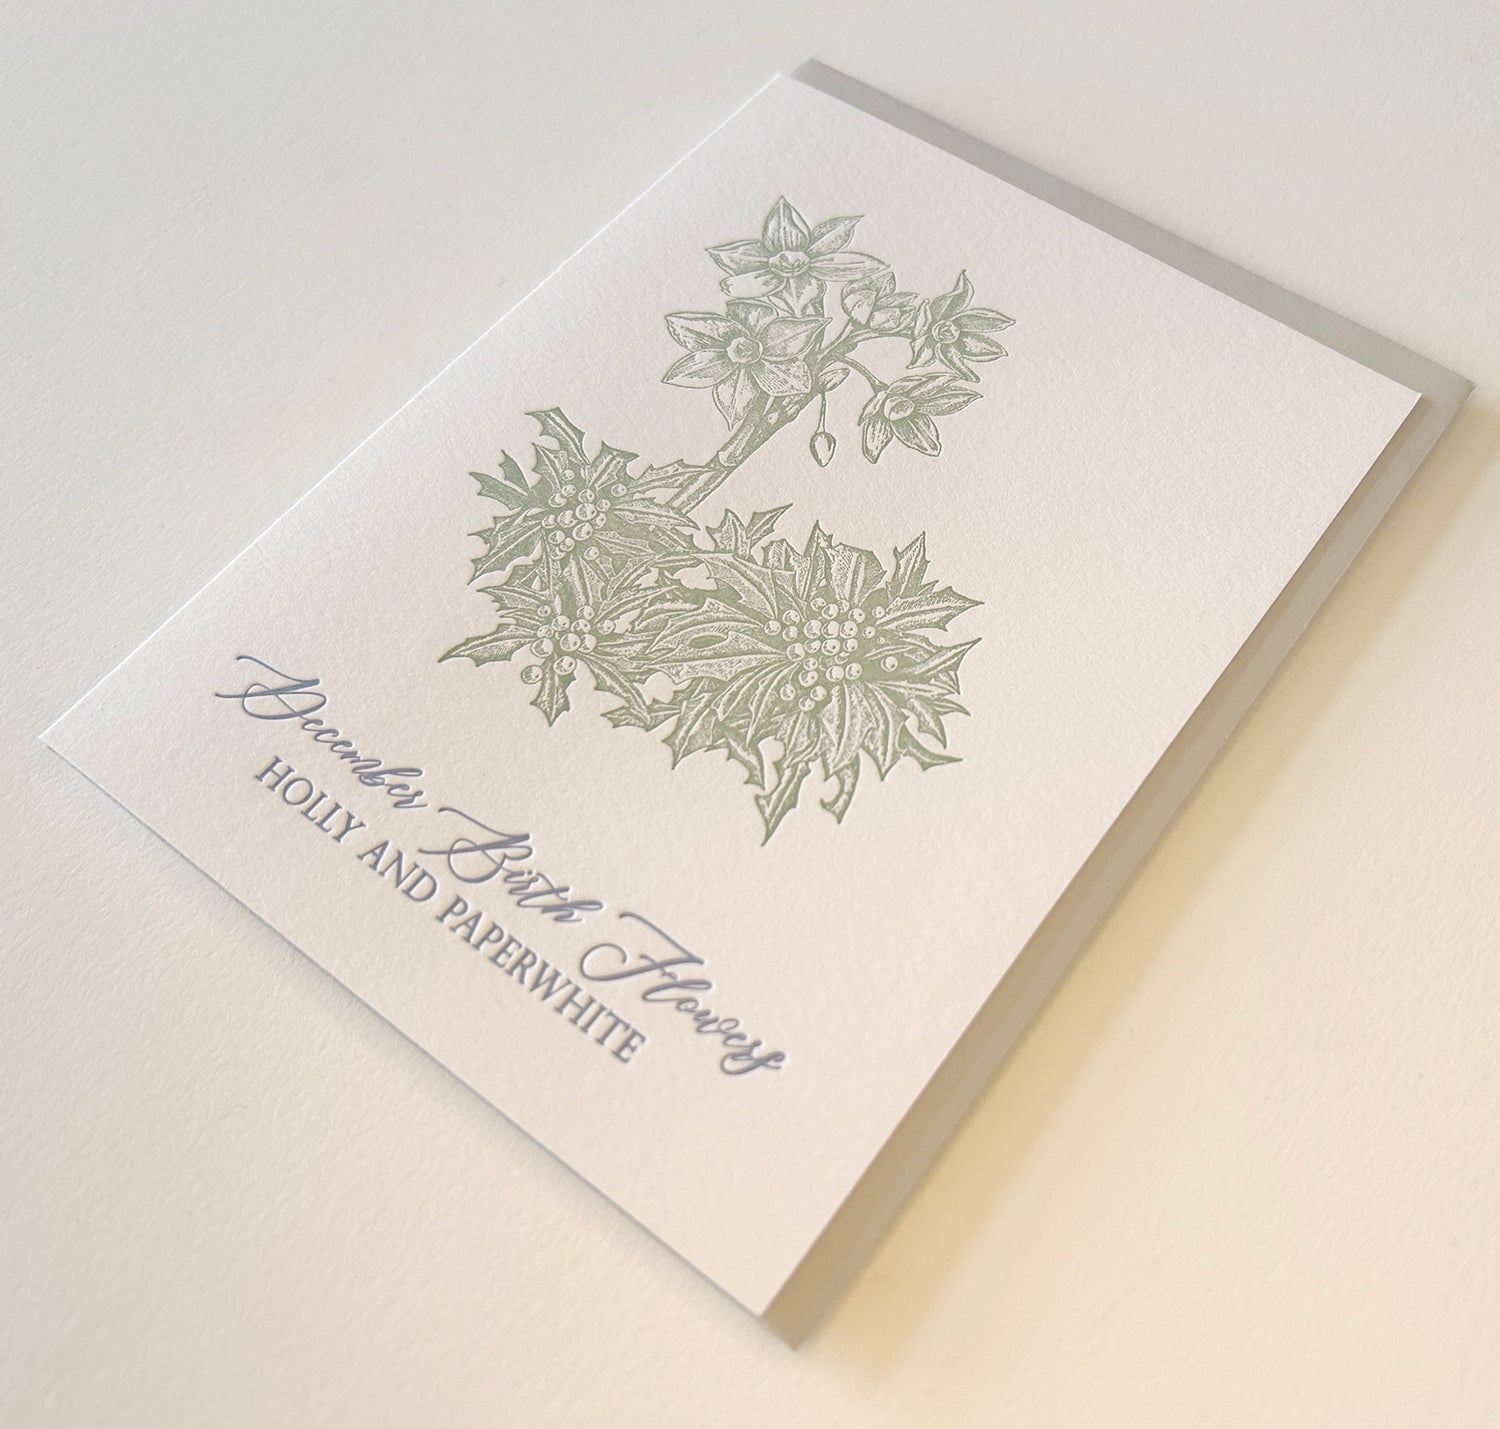 Letterpress birthday card with florals that says "December Birth Flowers, Holly And Paperwhite" by Rust Belt Love